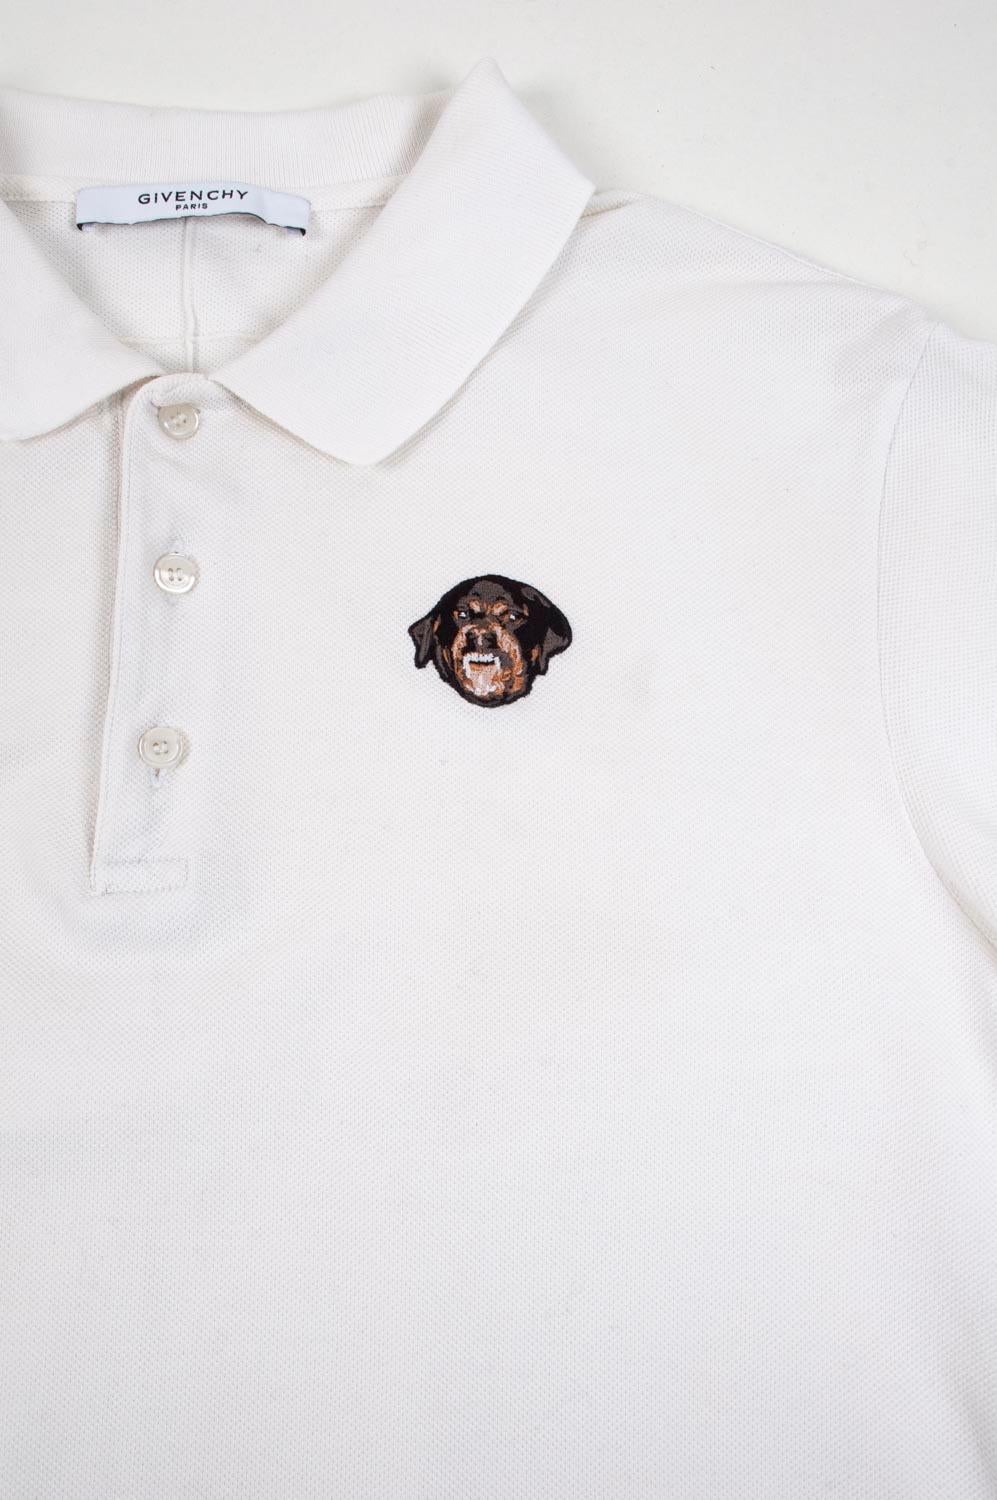 Givenchy Rottweiler Men Polo Shirt Top Size XL, S300 For Sale 3